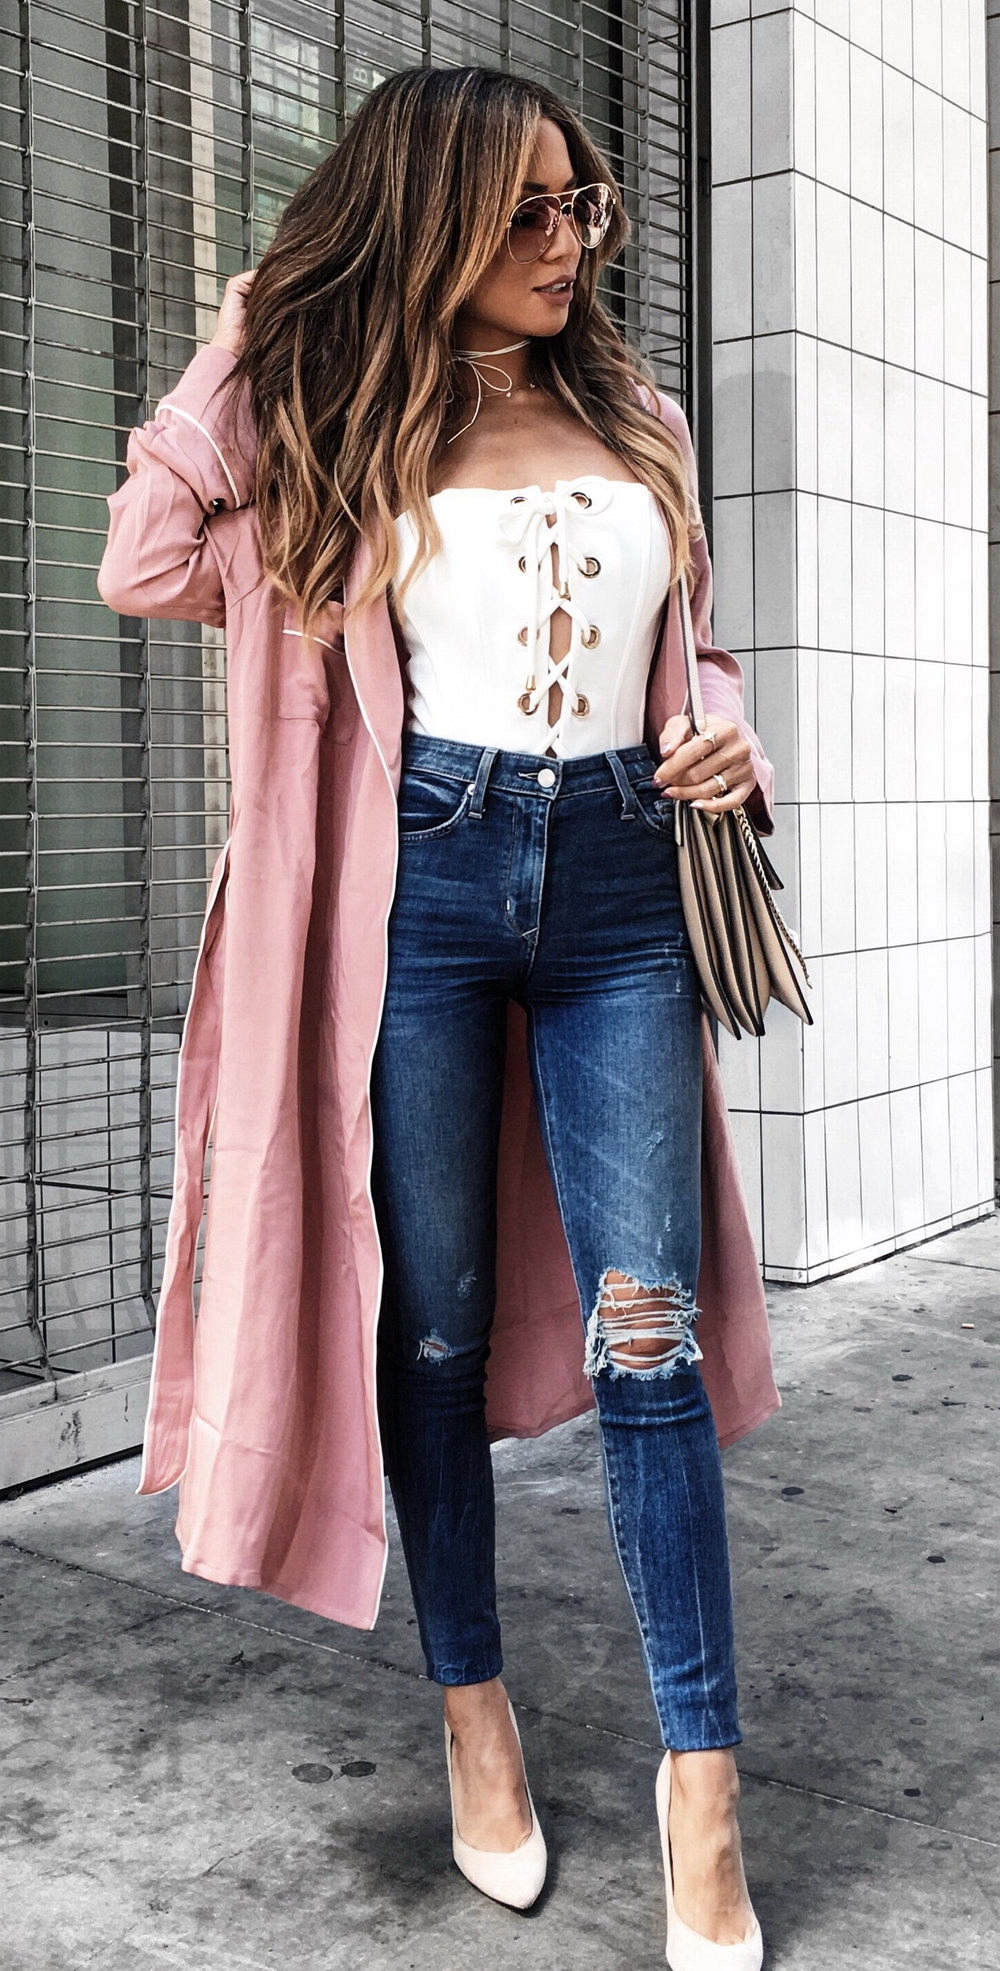 35 Stylish Outfit Ideas for Women 2021 – Outfits for Summer, Winter ...